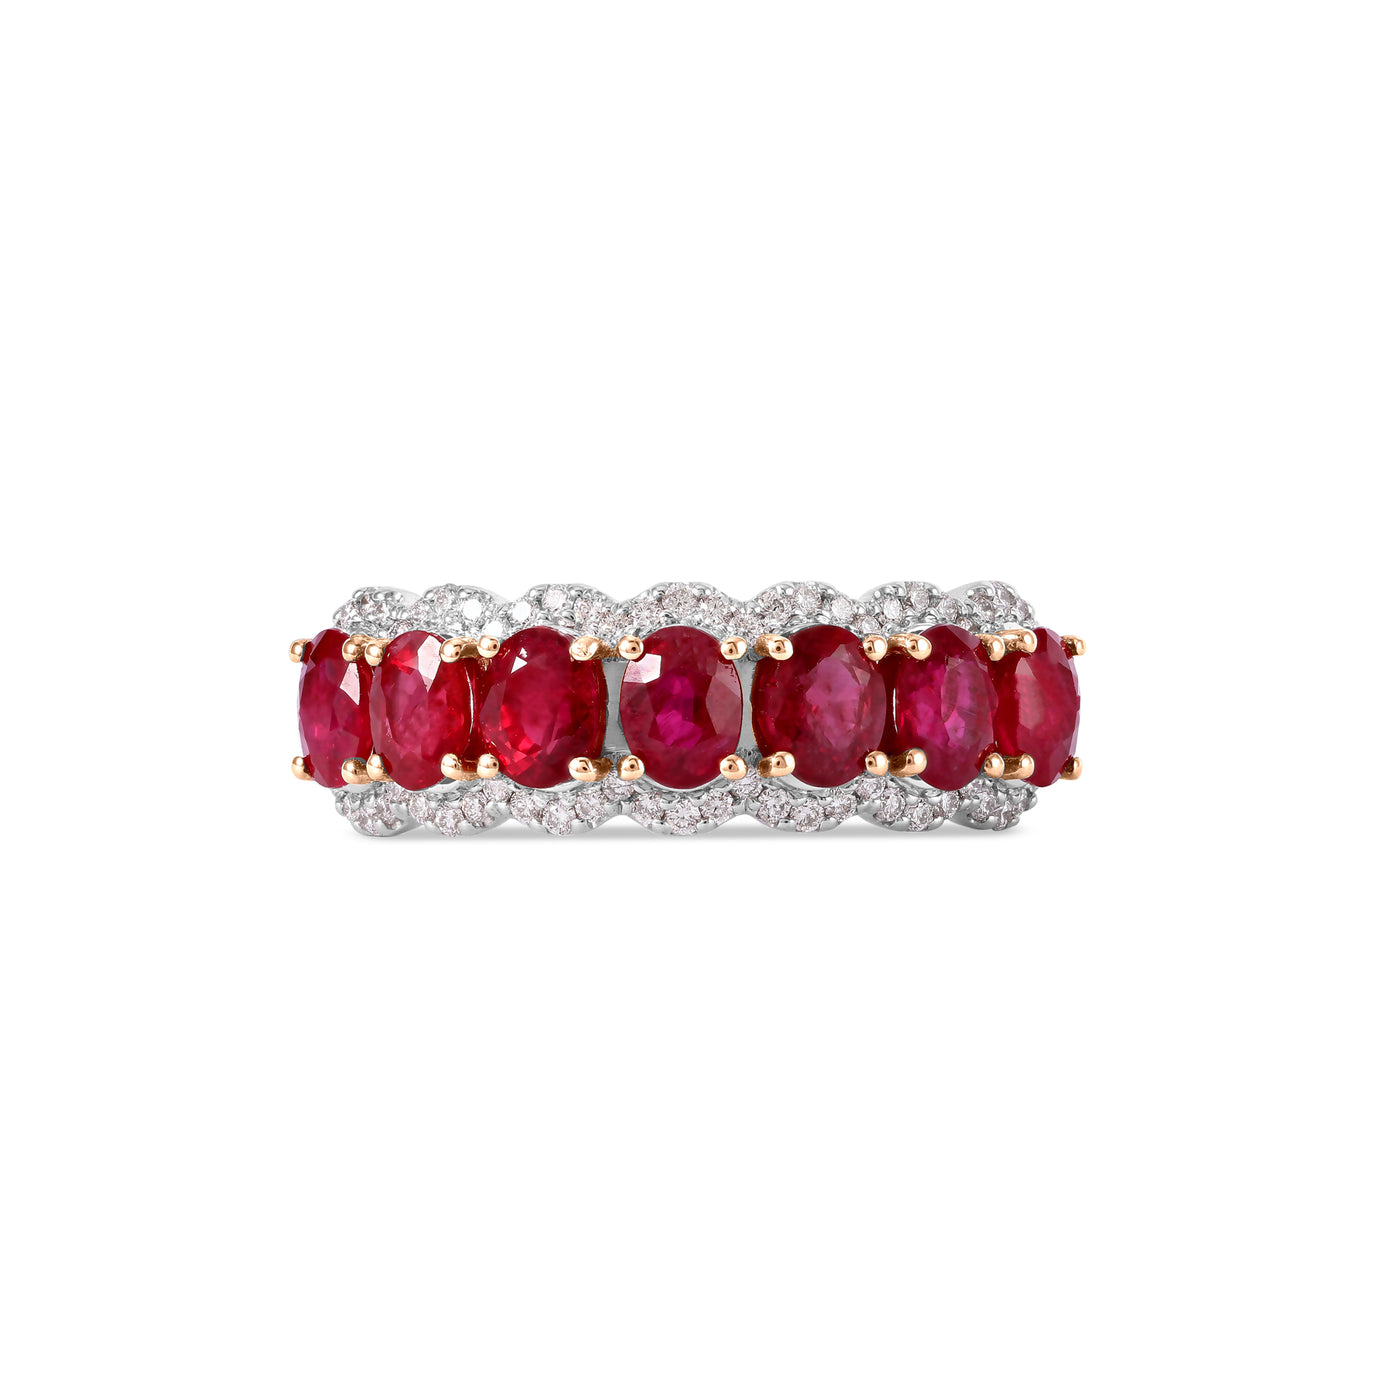 Soit Belle White Gold Diamond Ring With Natural Ruby.